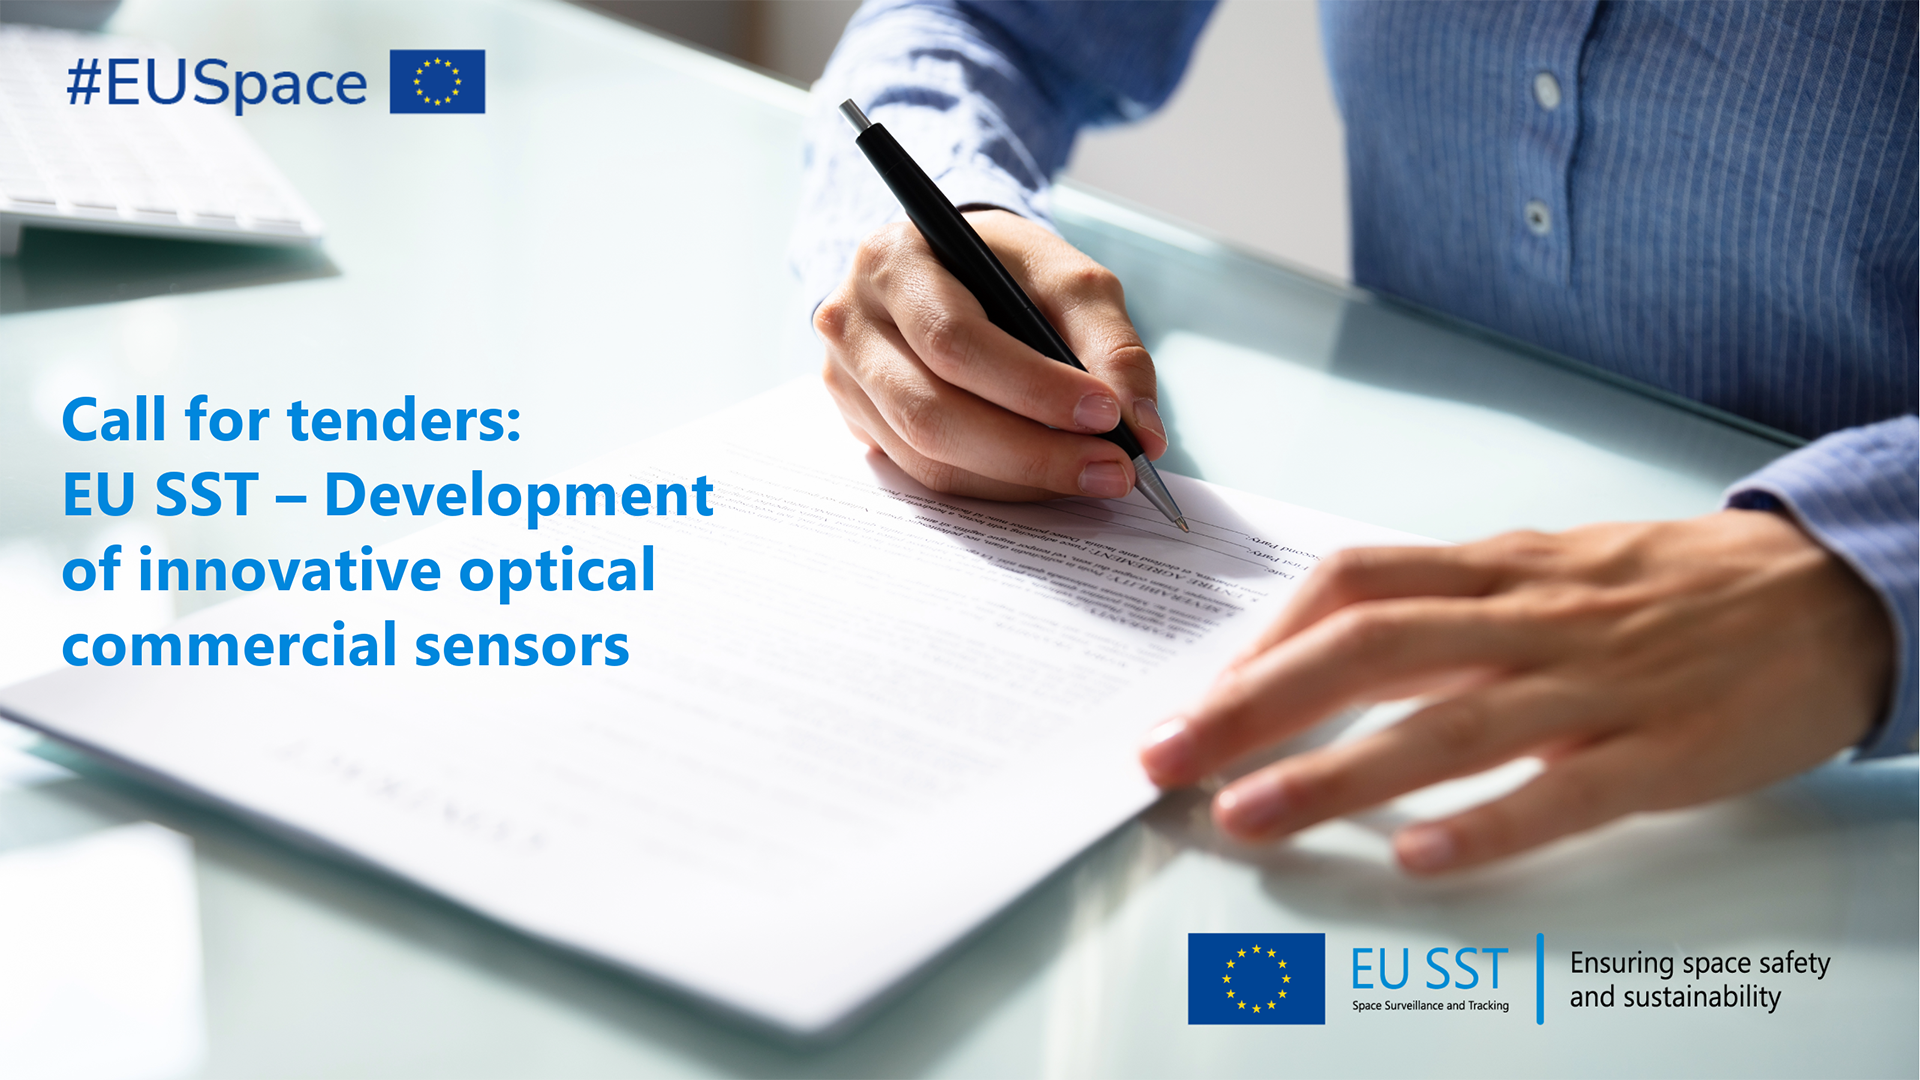 Call for proposals – Development of Innovative optical commercial sensors